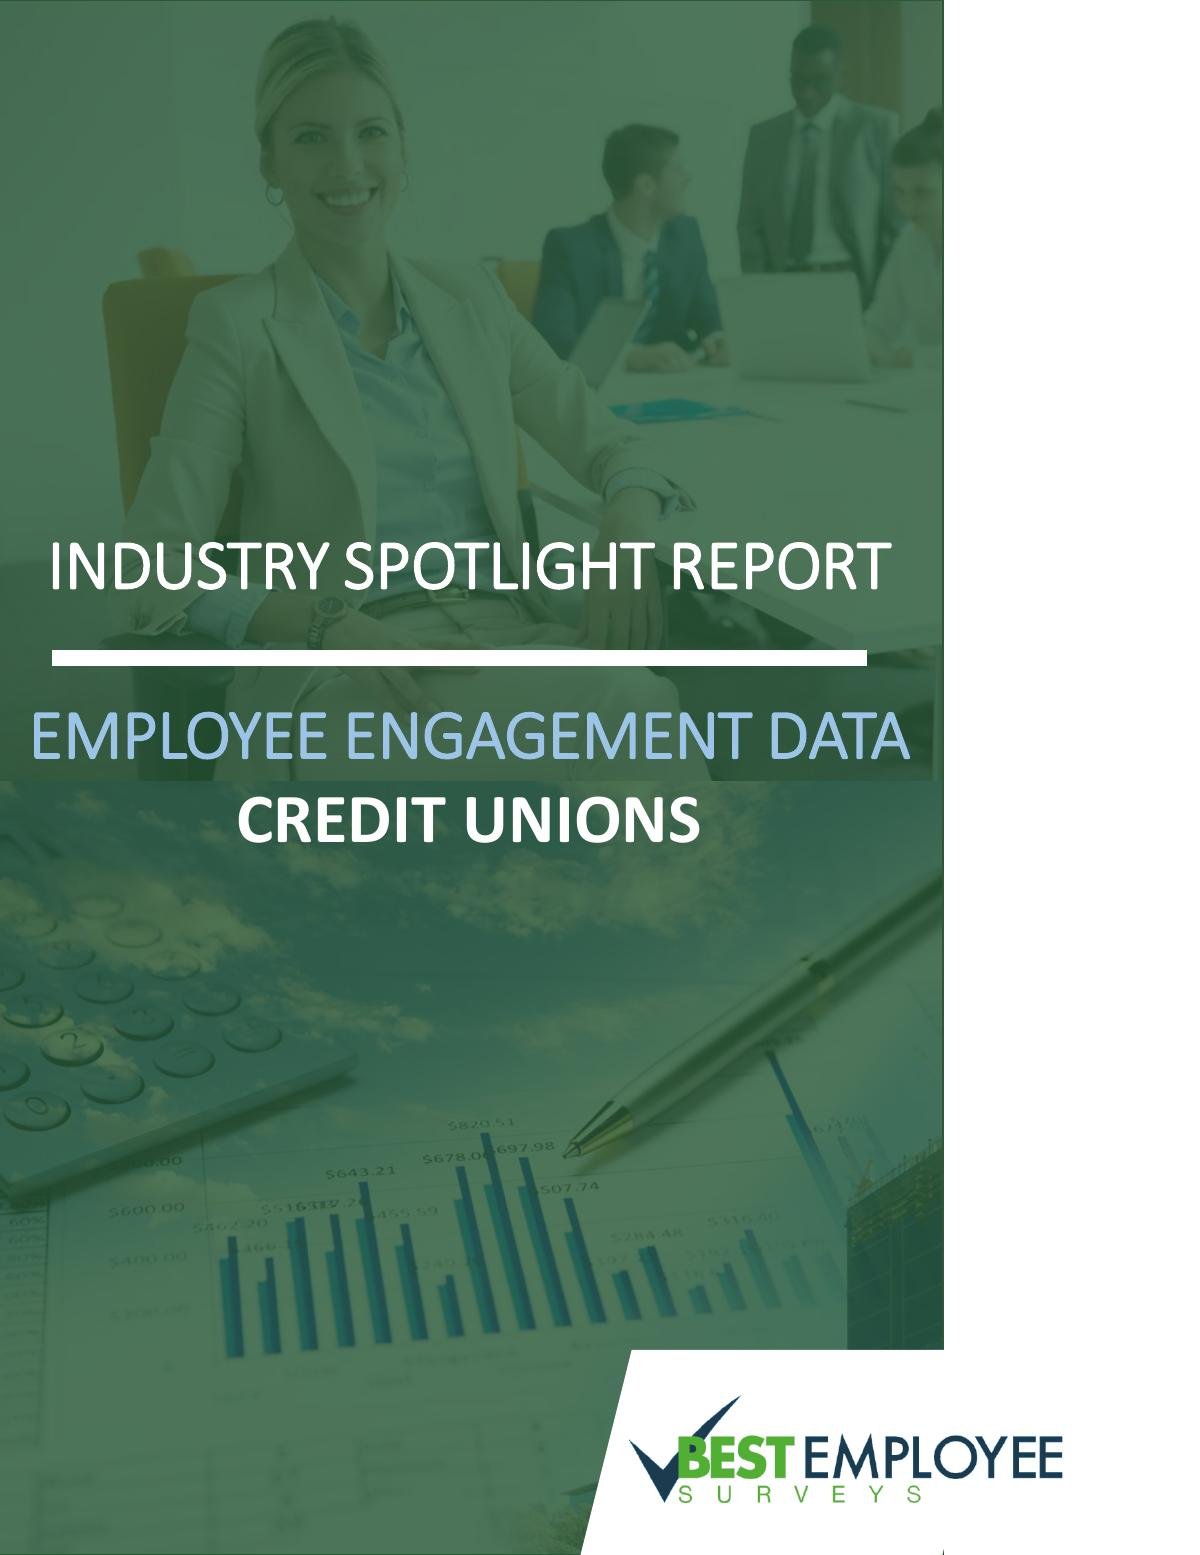 2019 Employee Engagement and Satisfaction Report - Credit Unions